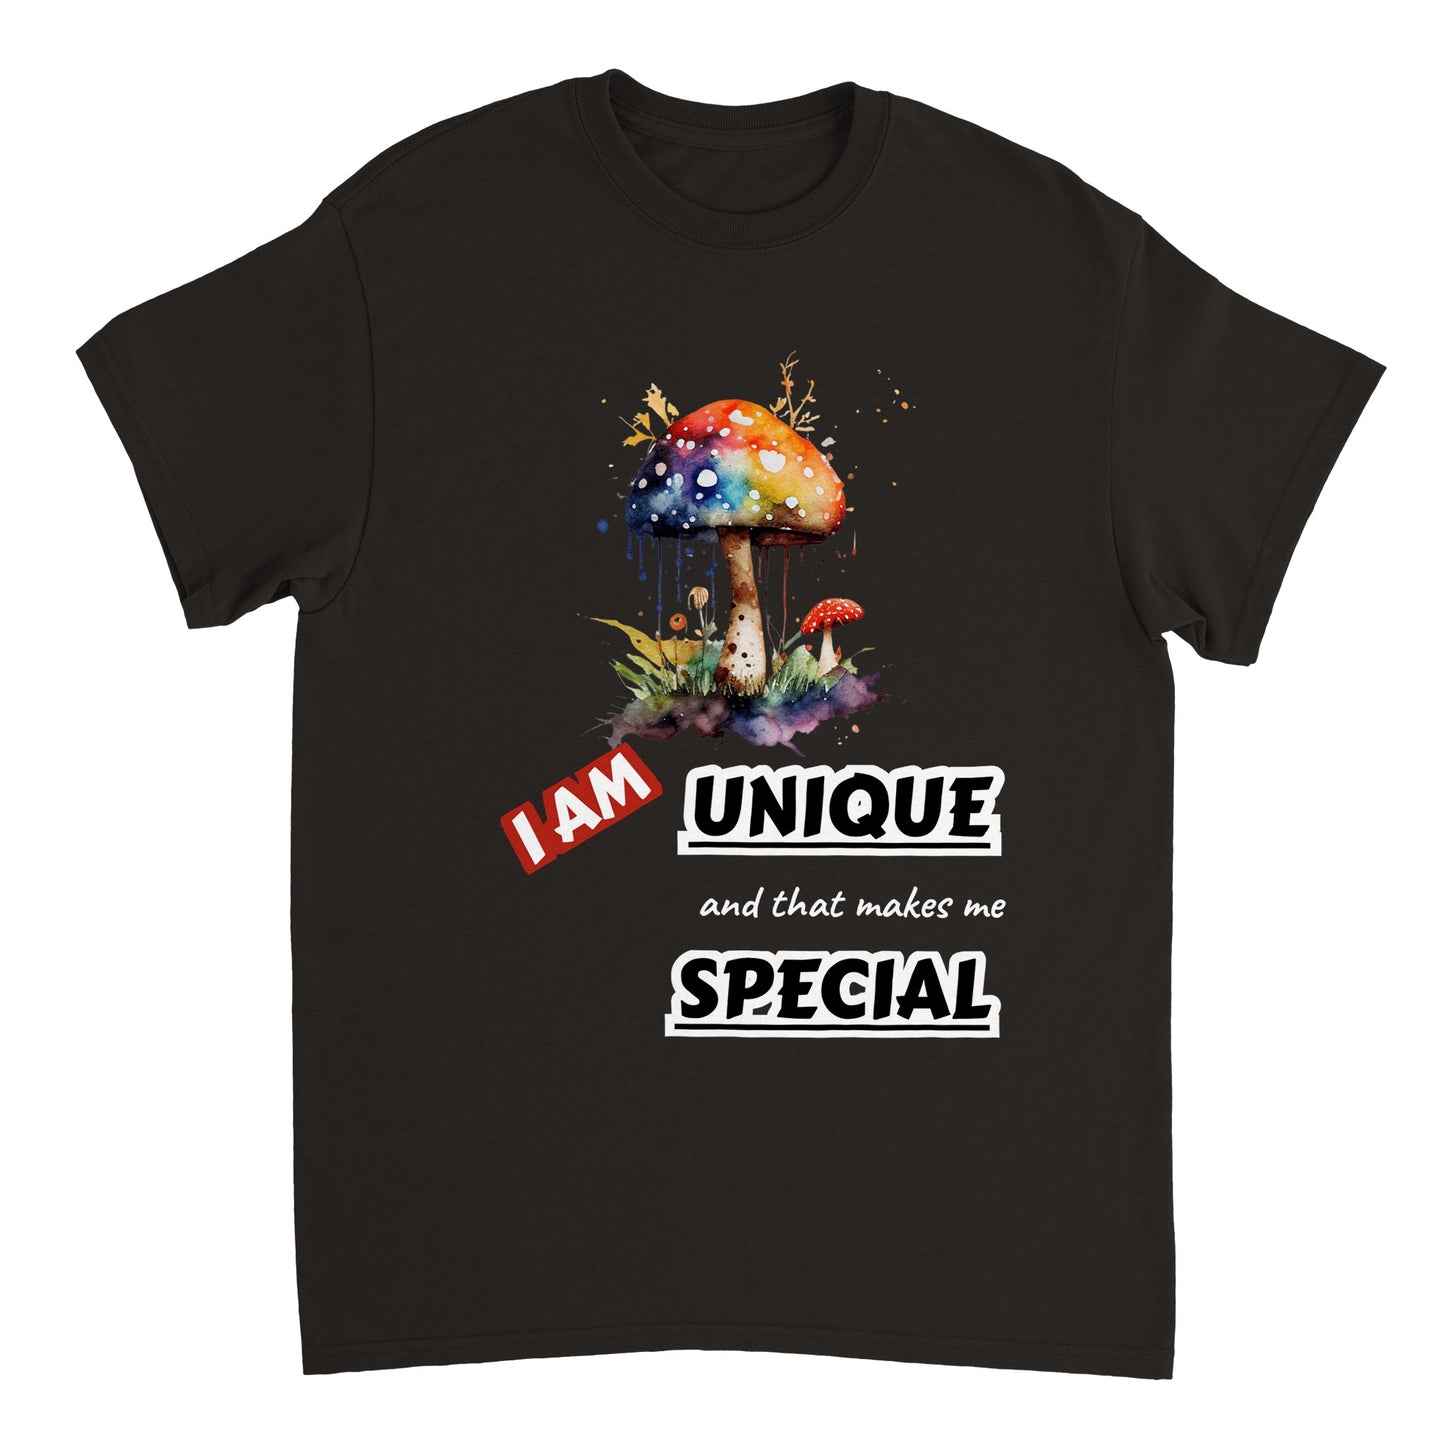 I AM UNIQUE, AND THAT MAKES ME SPECIAL - INSPIRATIONAL QUOTES FASHION COLOURFUL PICTURE OF A MUSHROOM. FOE MEN AND WOMEN - BLACK T-SHIRT